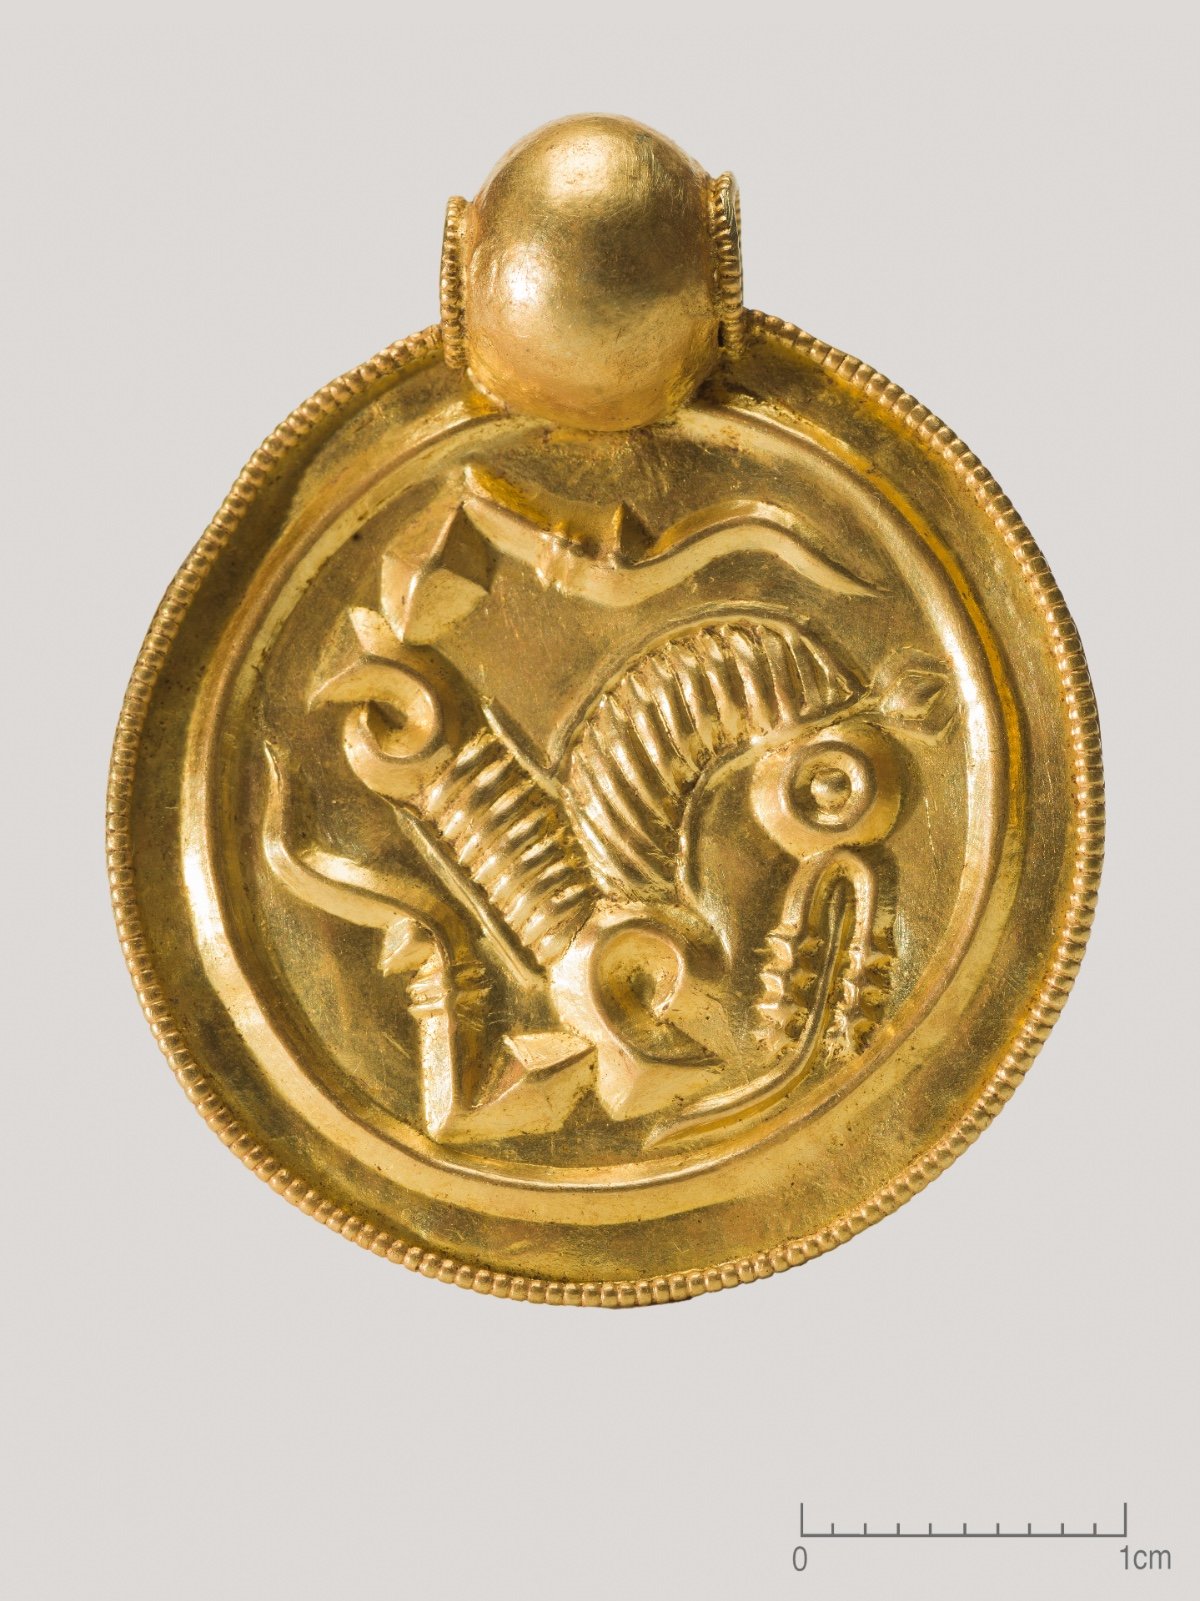 One of the nine gold pendants, or gold bracteates, that were found on Rennesøy. Photo: Museum of Archaeology.